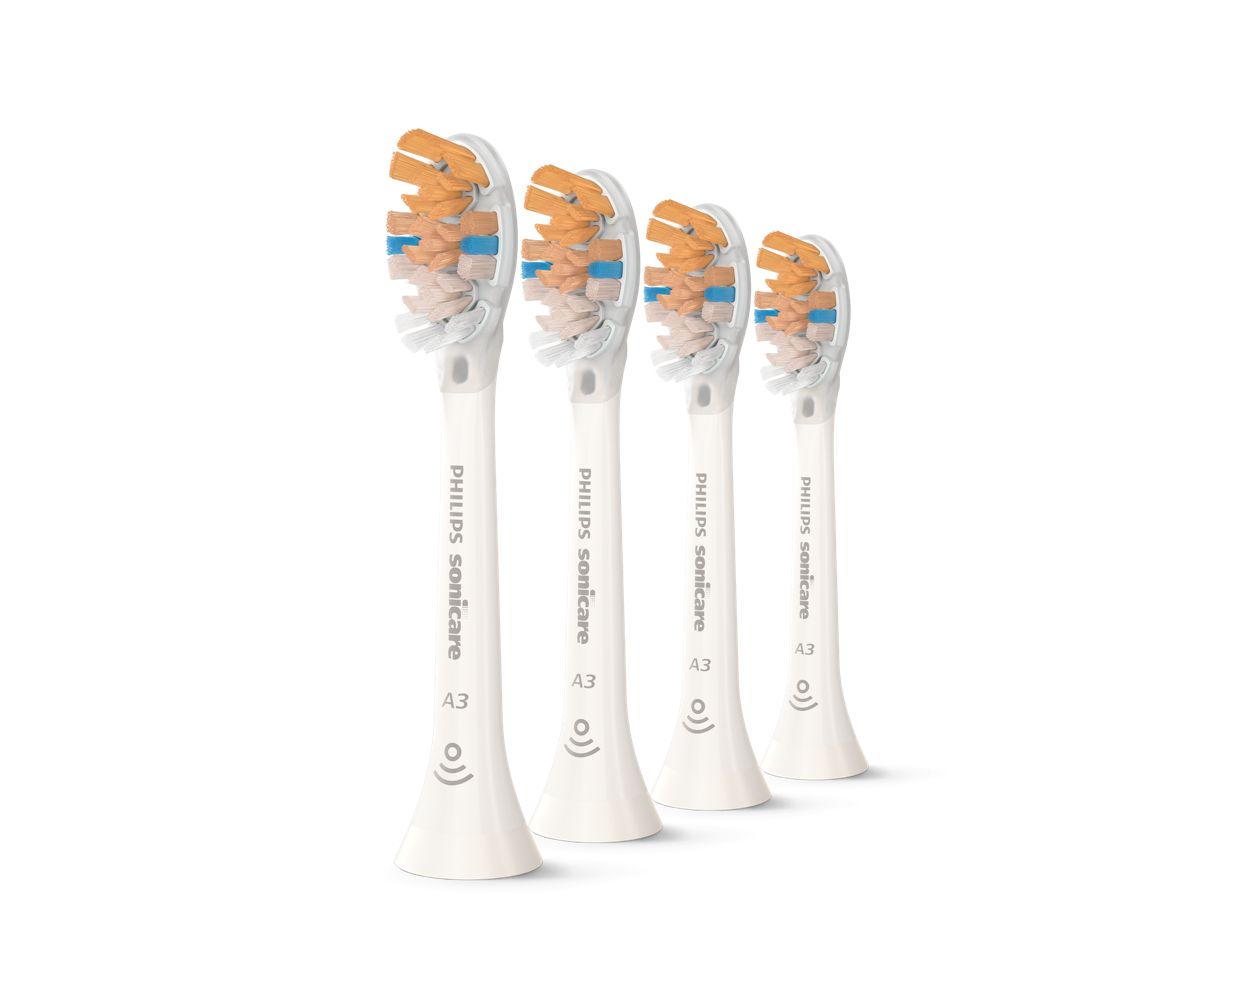 A3 Premium All-in-One Standard sonic toothbrush heads HX9094/65